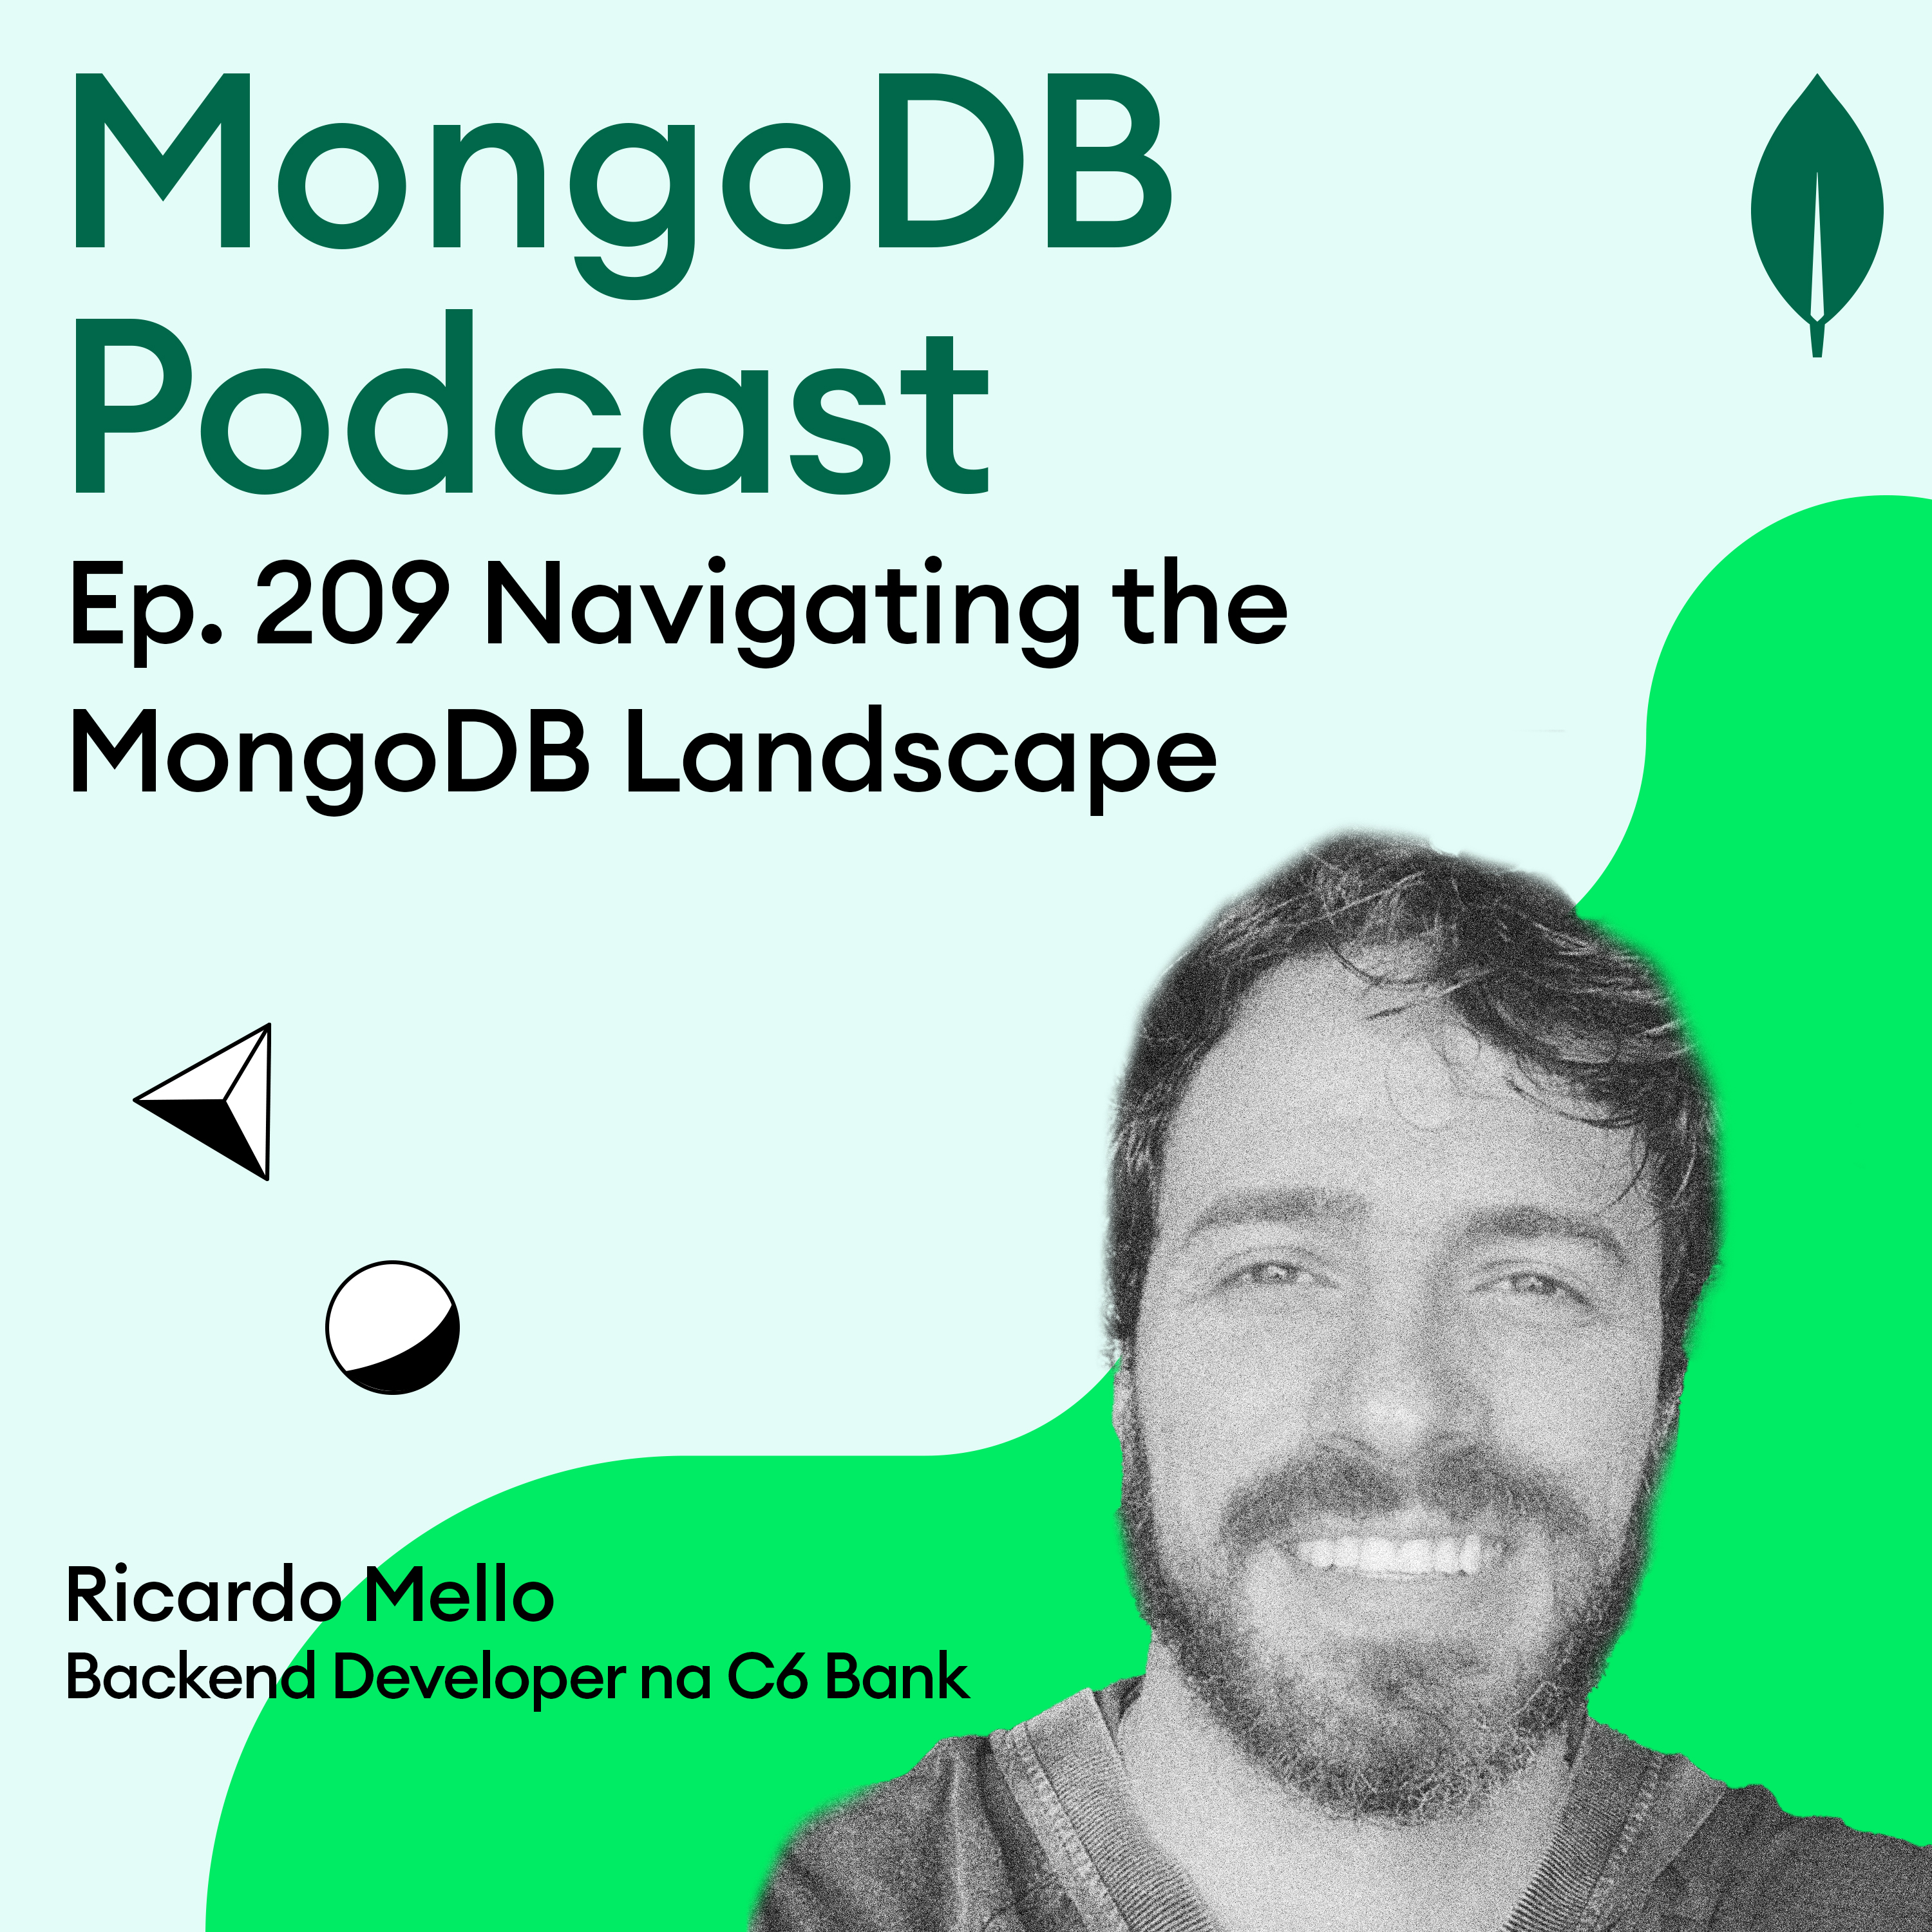 Ep. 209 Navigating the MongoDB Landscape with Ricardo Mello: Insights, Experiences, and Community Contributions